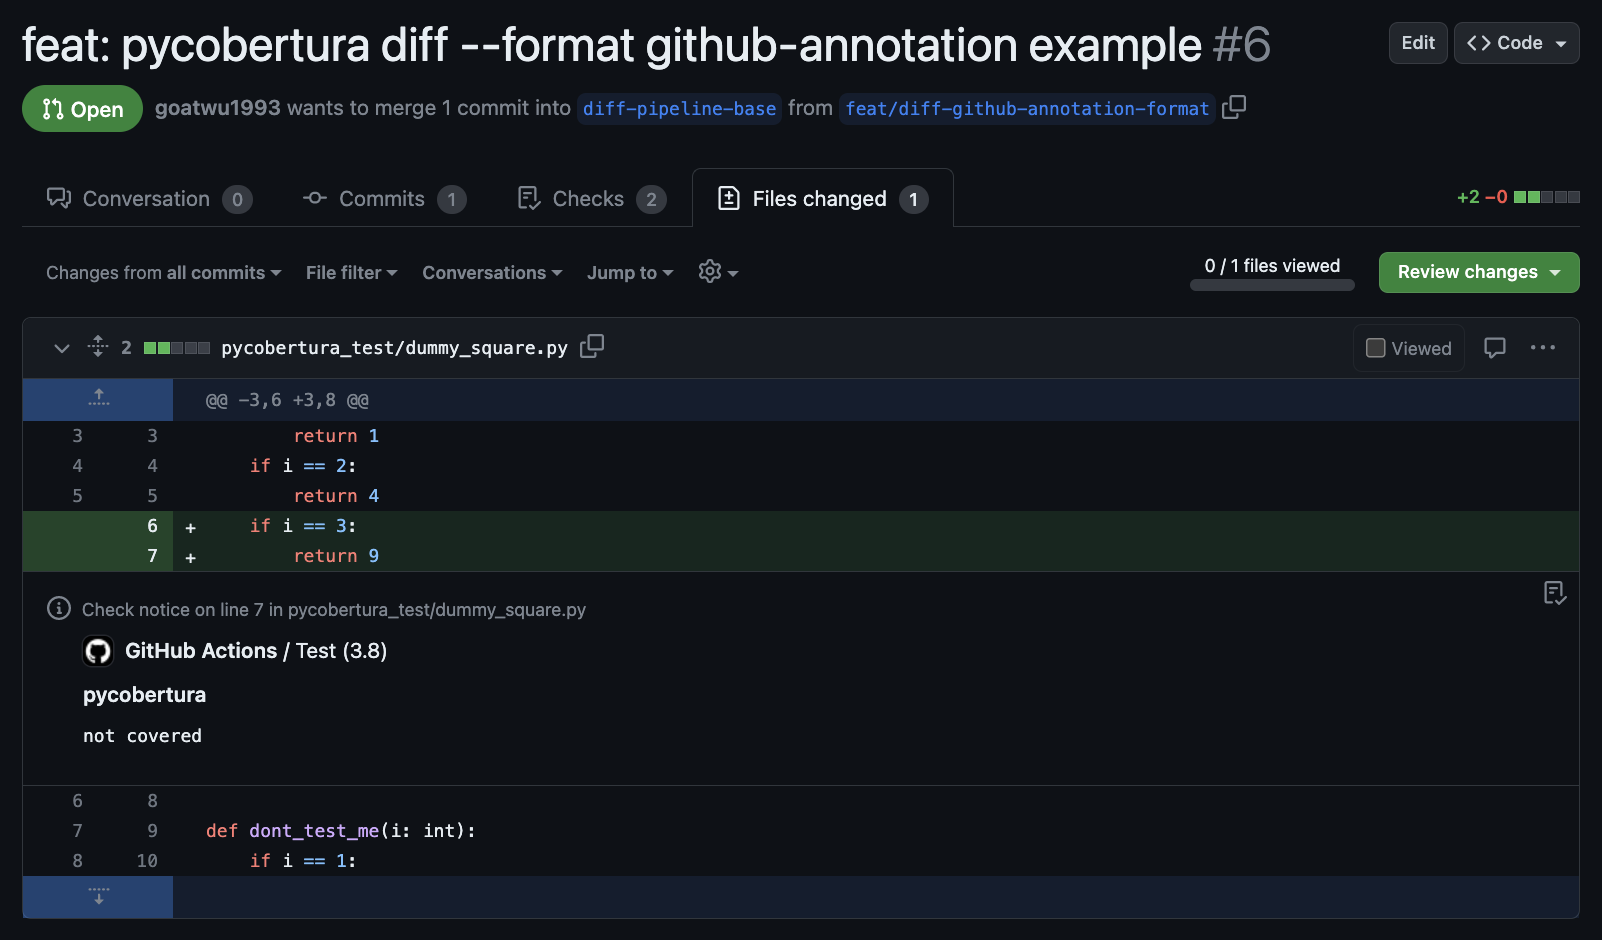 Example output of github-annotation formatted pycobertura diff command